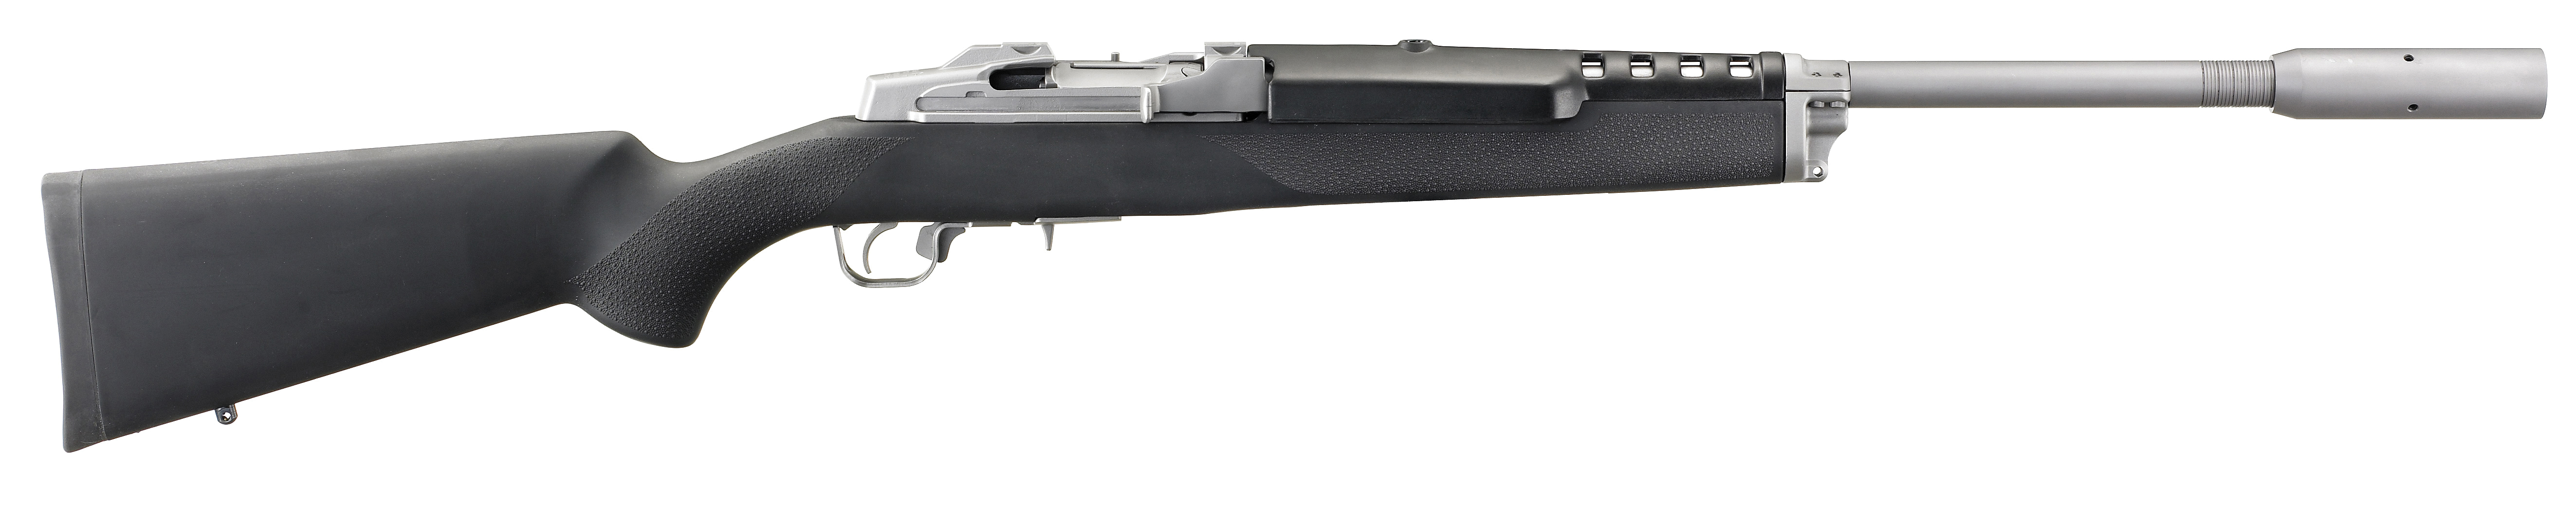 Weapons   Ruger Mini 14 Wallpaper